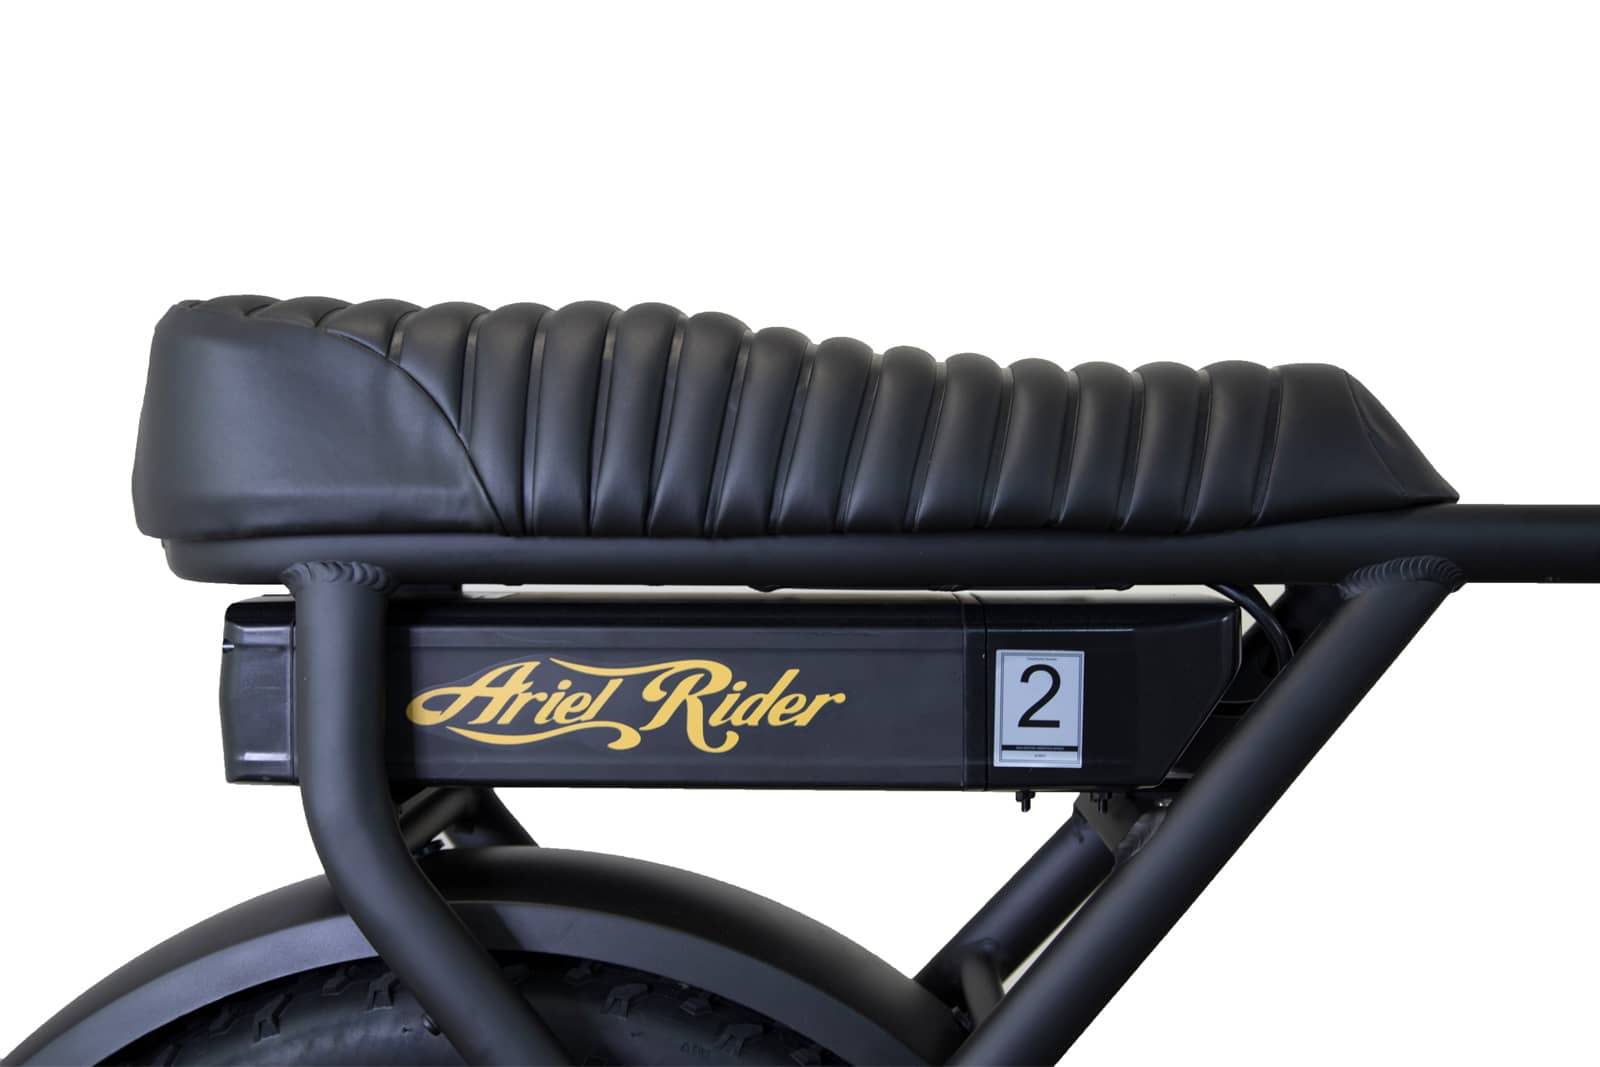 The battery of Ariel Rider electric bike